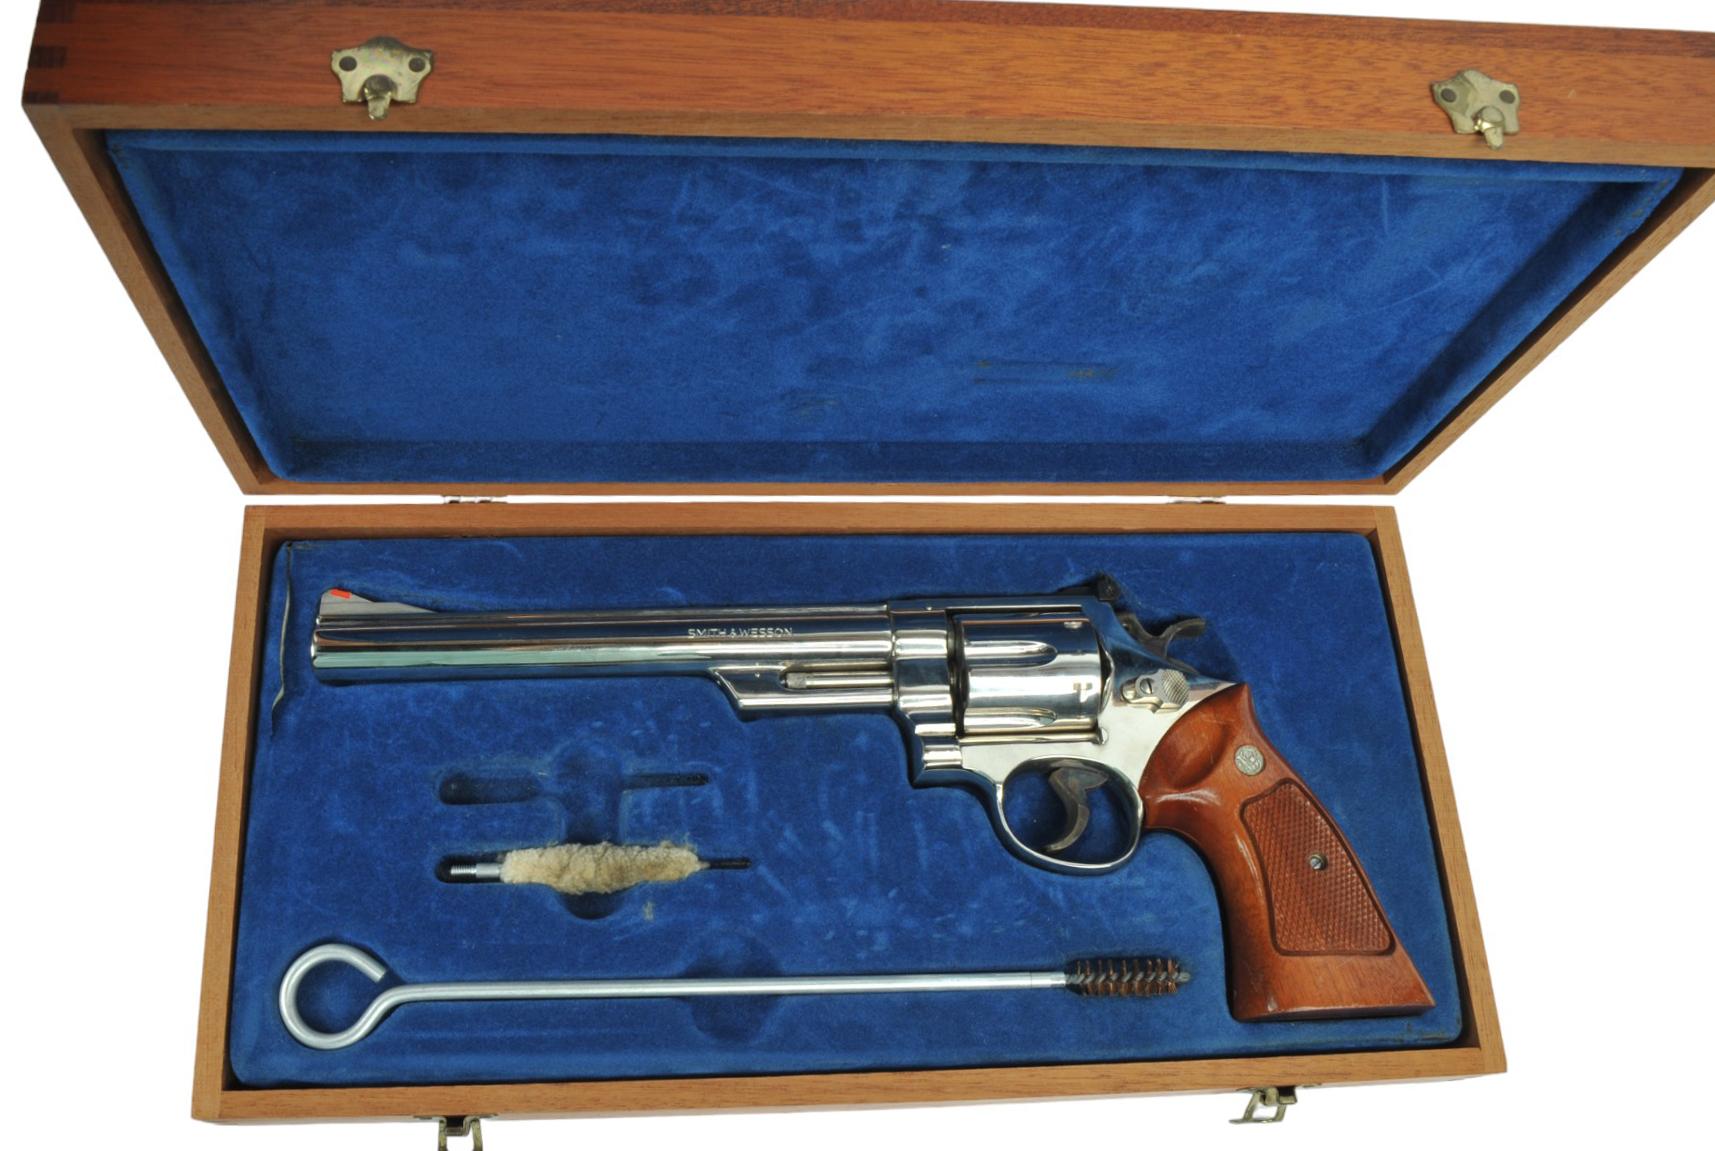 Smith & Wesson Model 29-2 44 Mag Revolver FFL Required: N667325/32851 (MGX1)